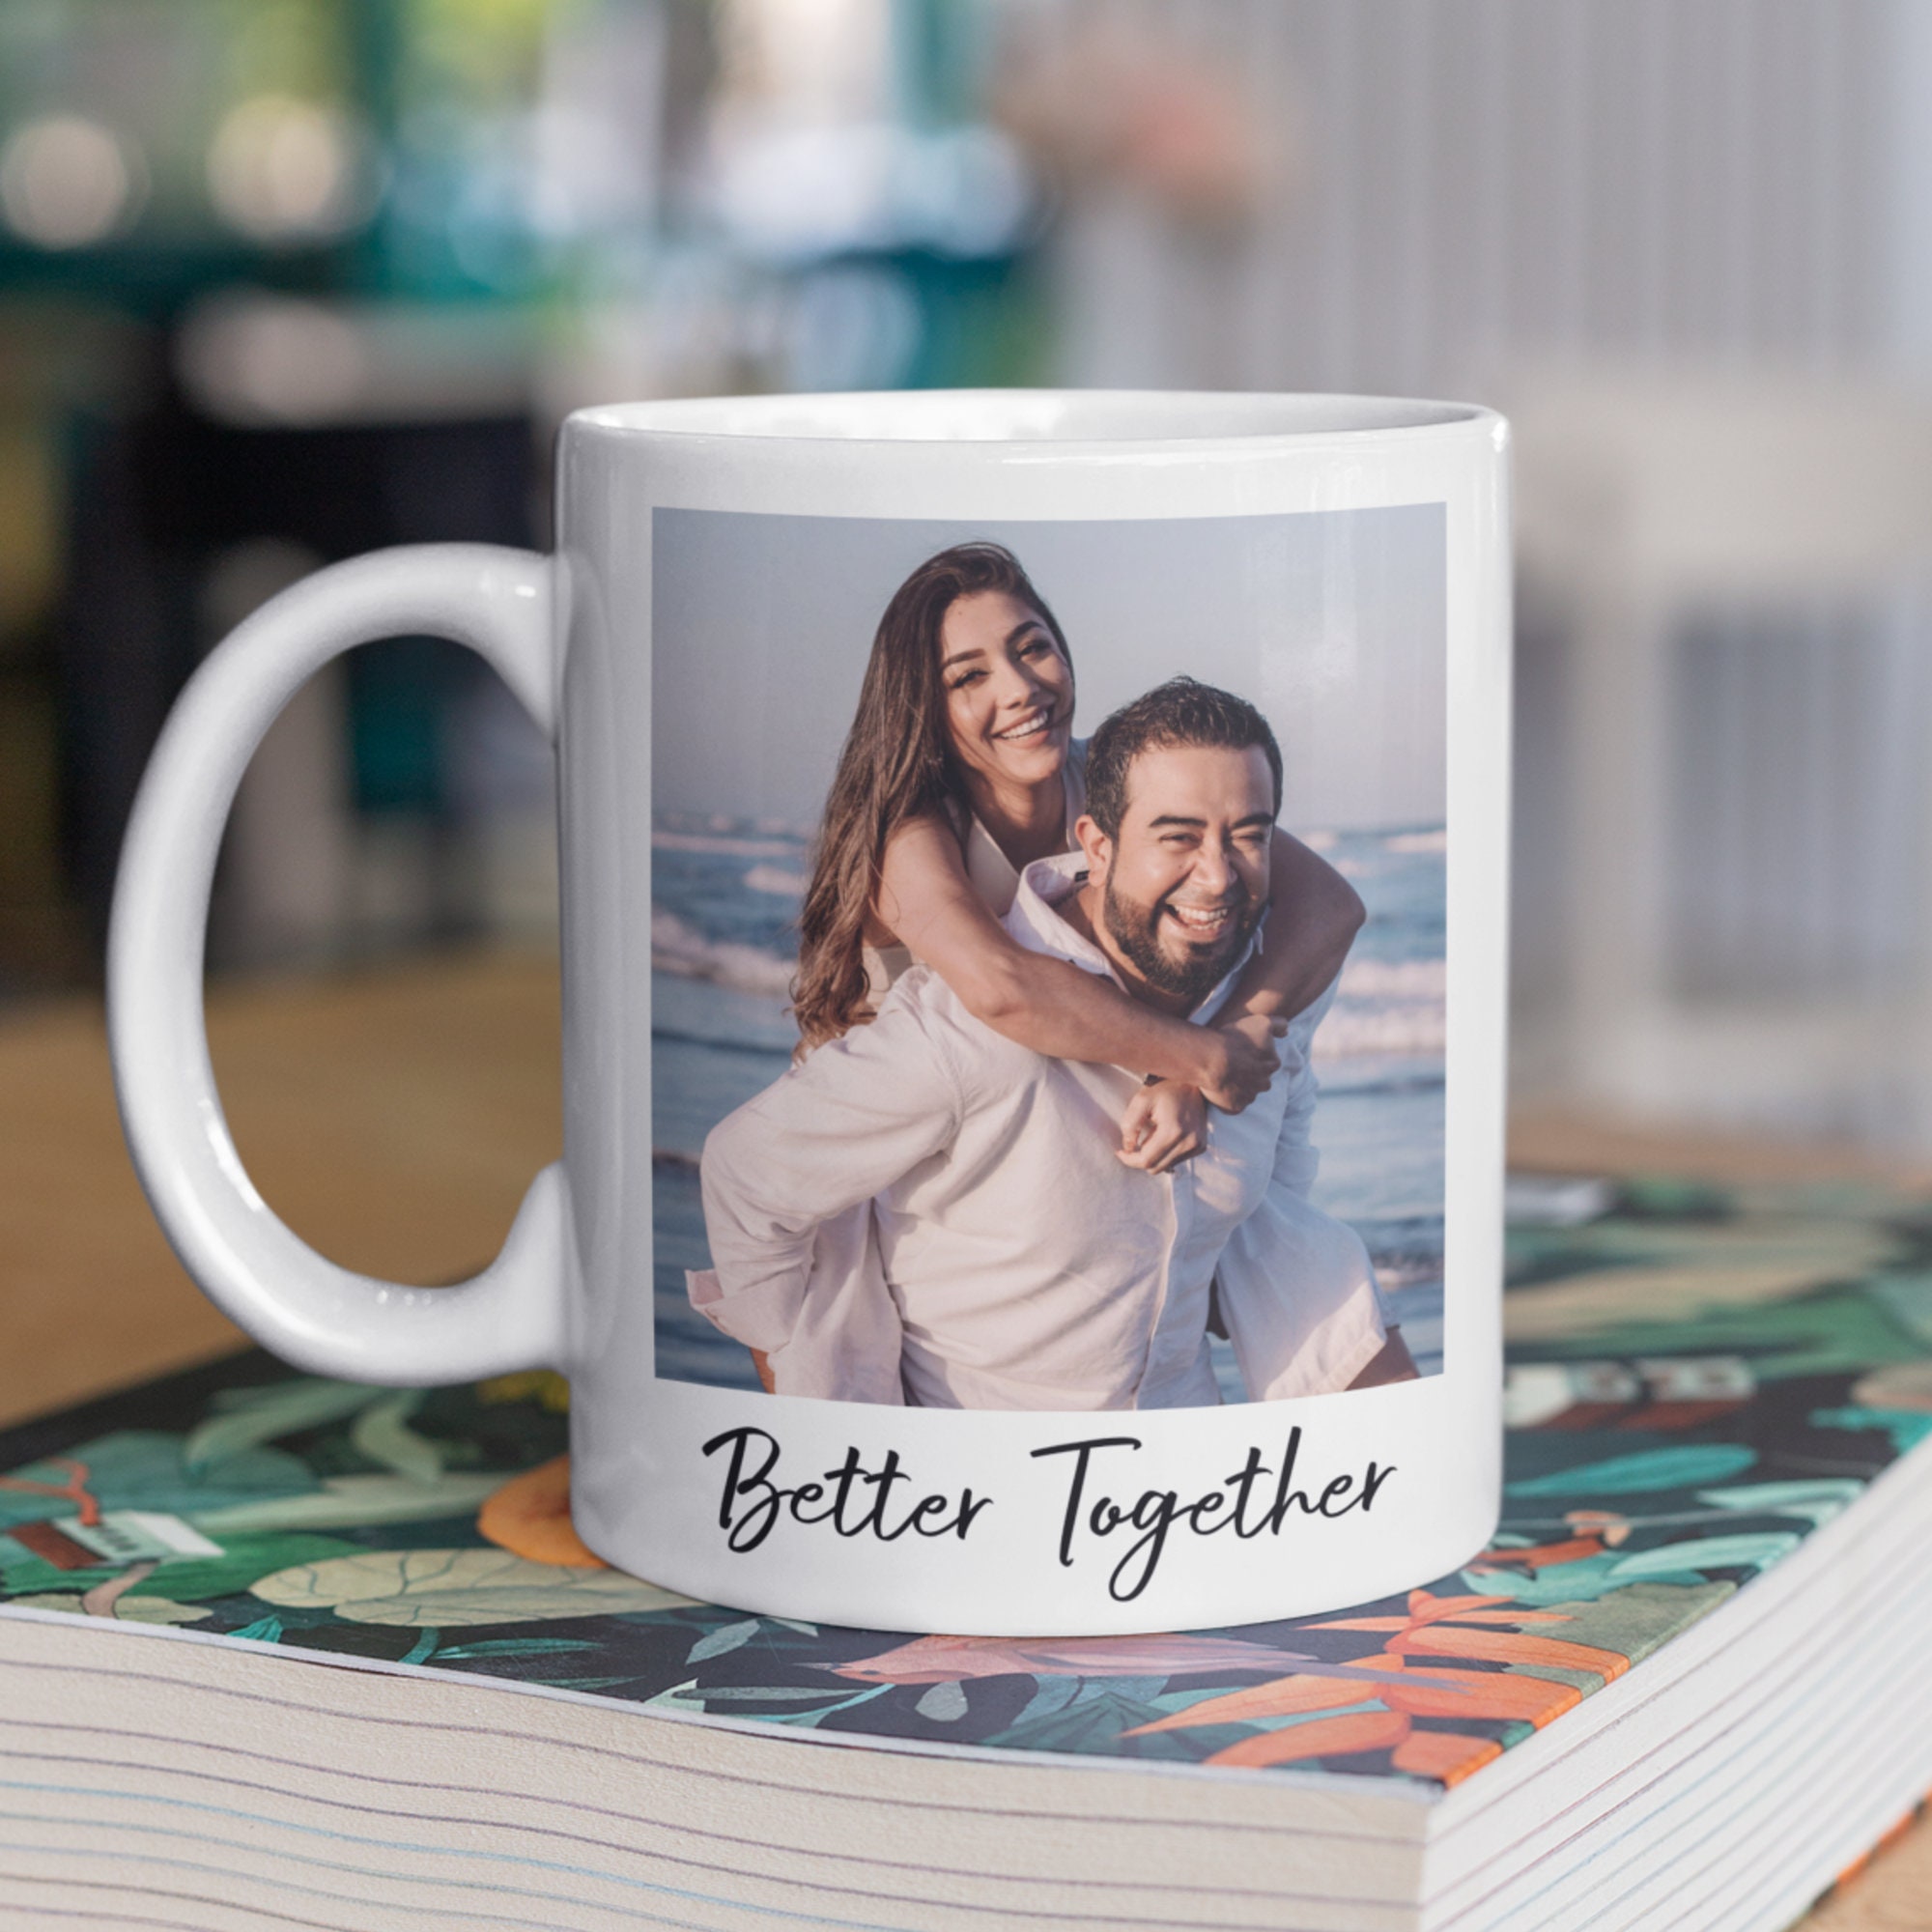 Custom Text Mug Personalized Photo Mug Image Printed Coffee picture picture